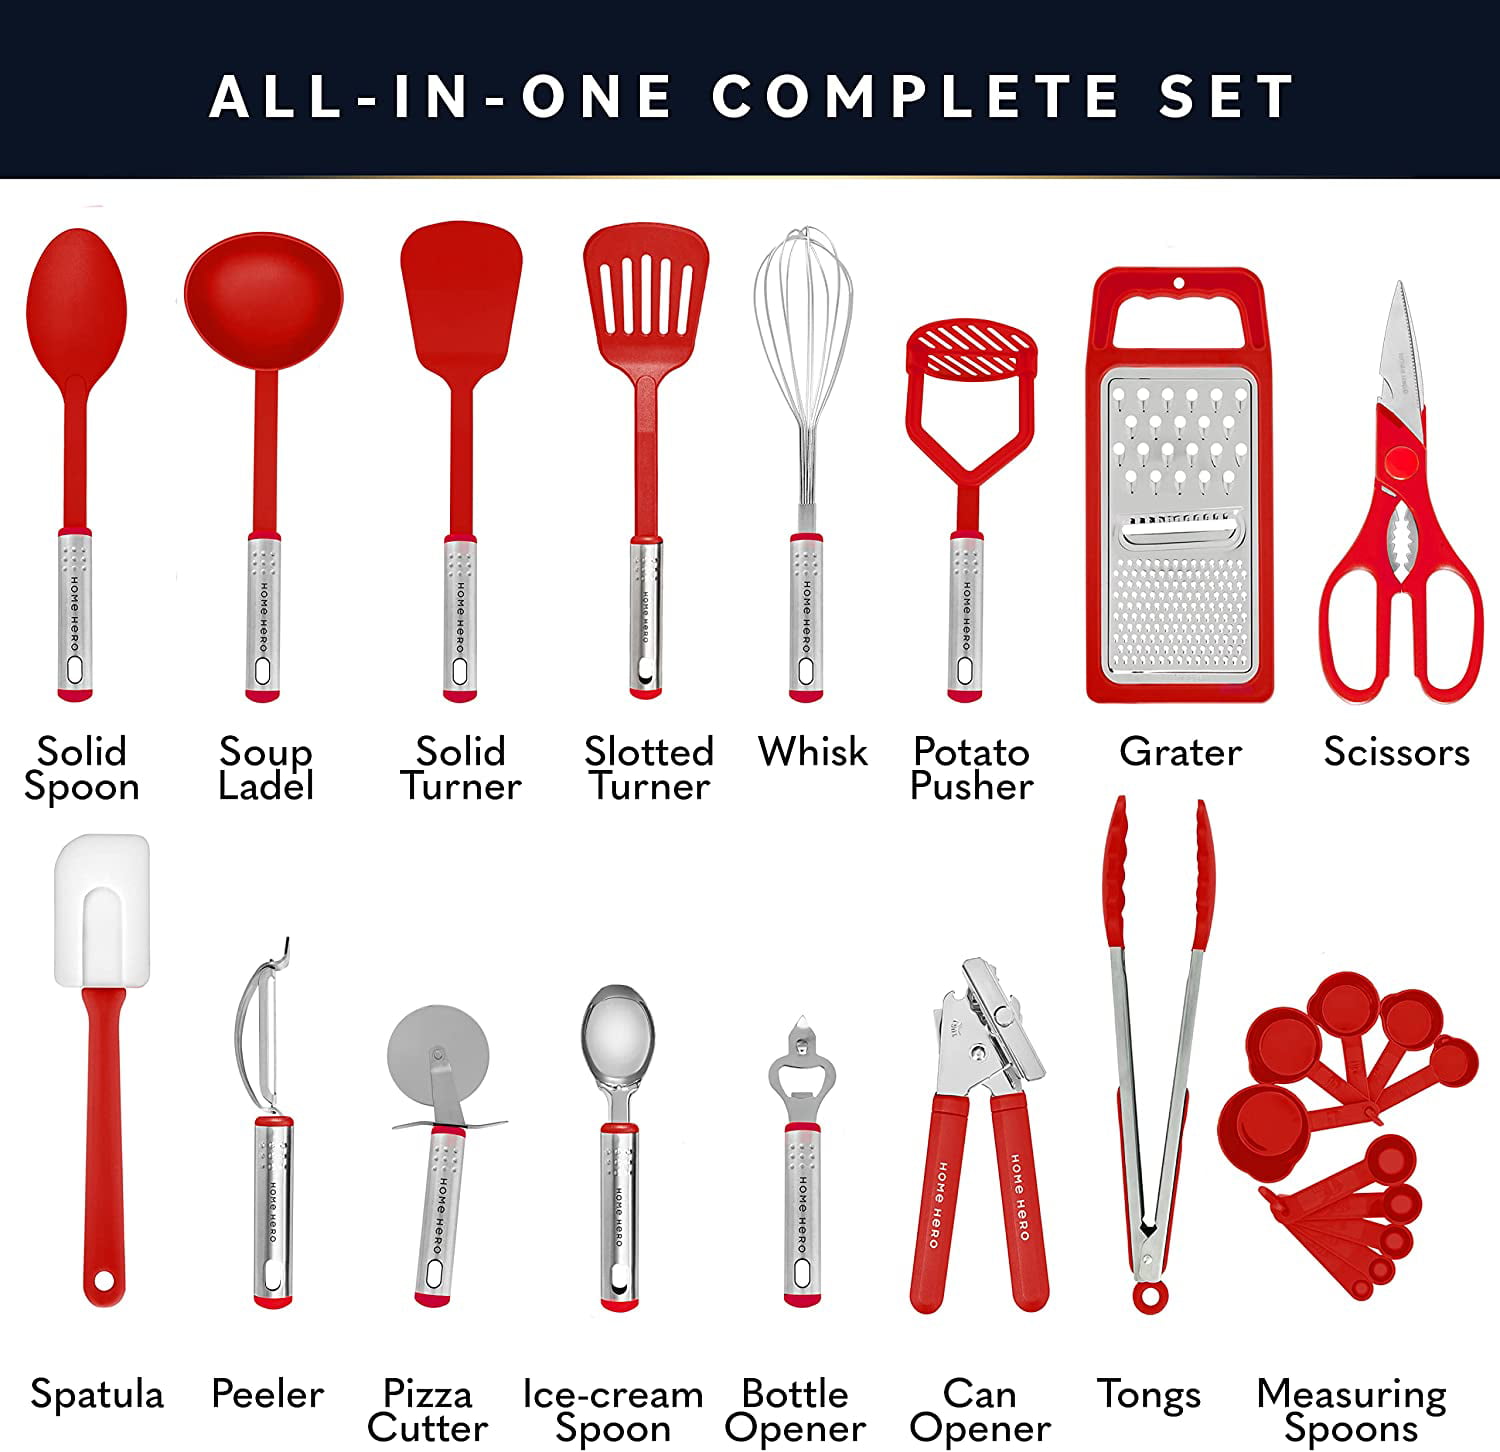 List of Kitchen Items: 45 Tools for Healthy Cooking at Home